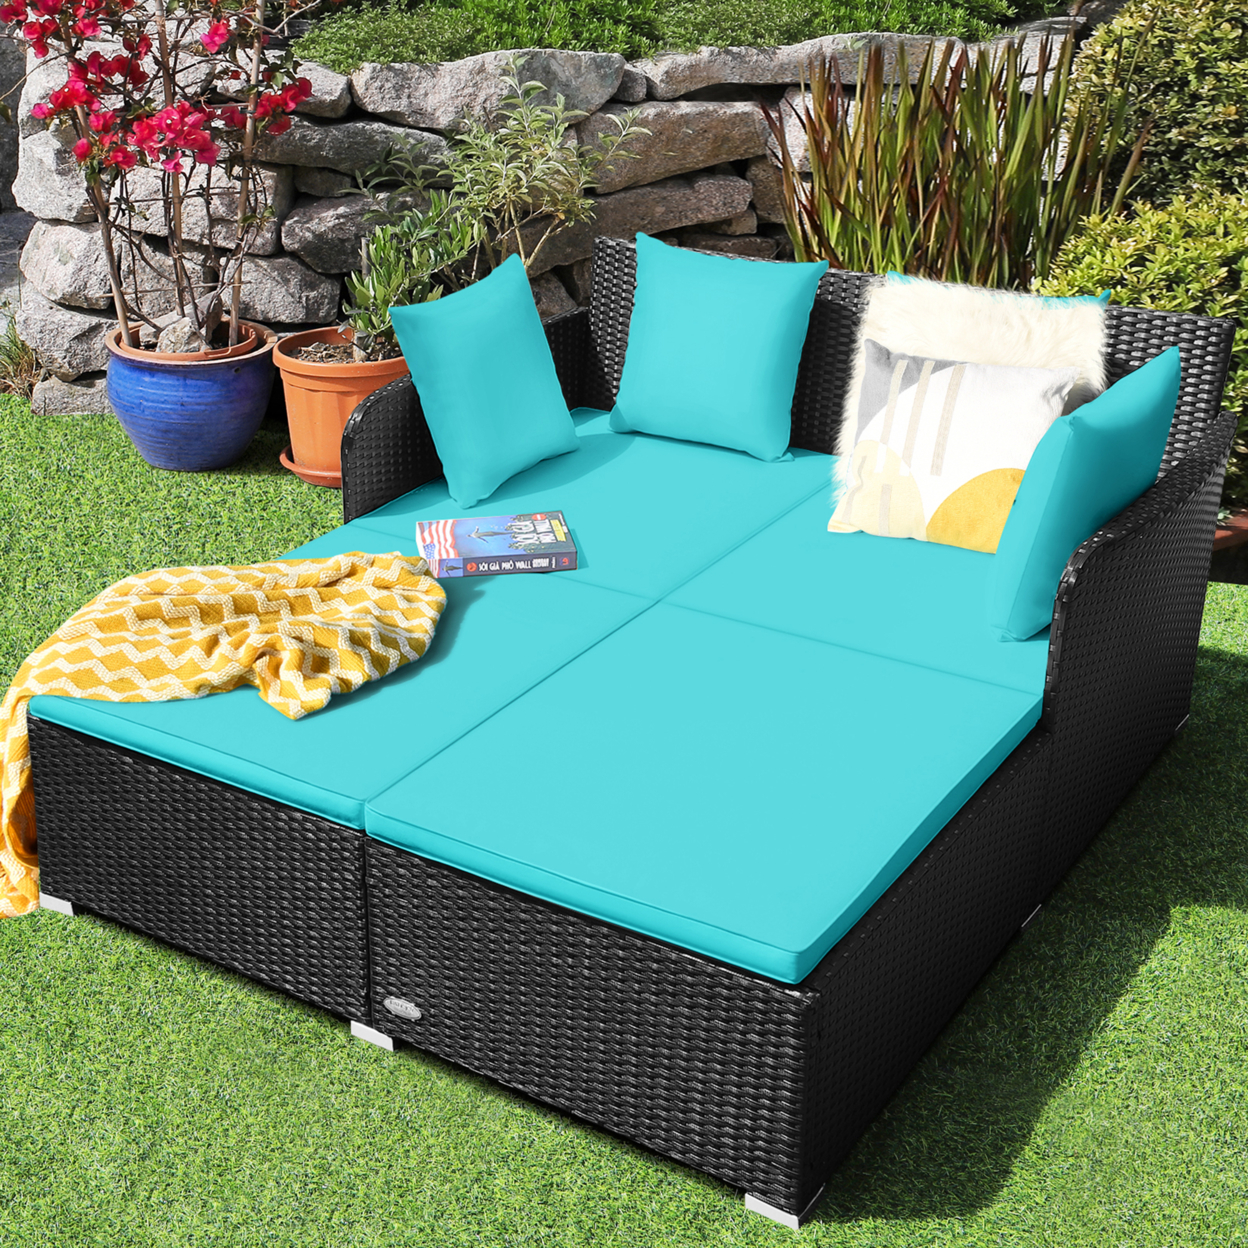 Rattan Patio Daybed Loveseat Sofa Yard Outdoor W/ Turquoise Cushions Pillows